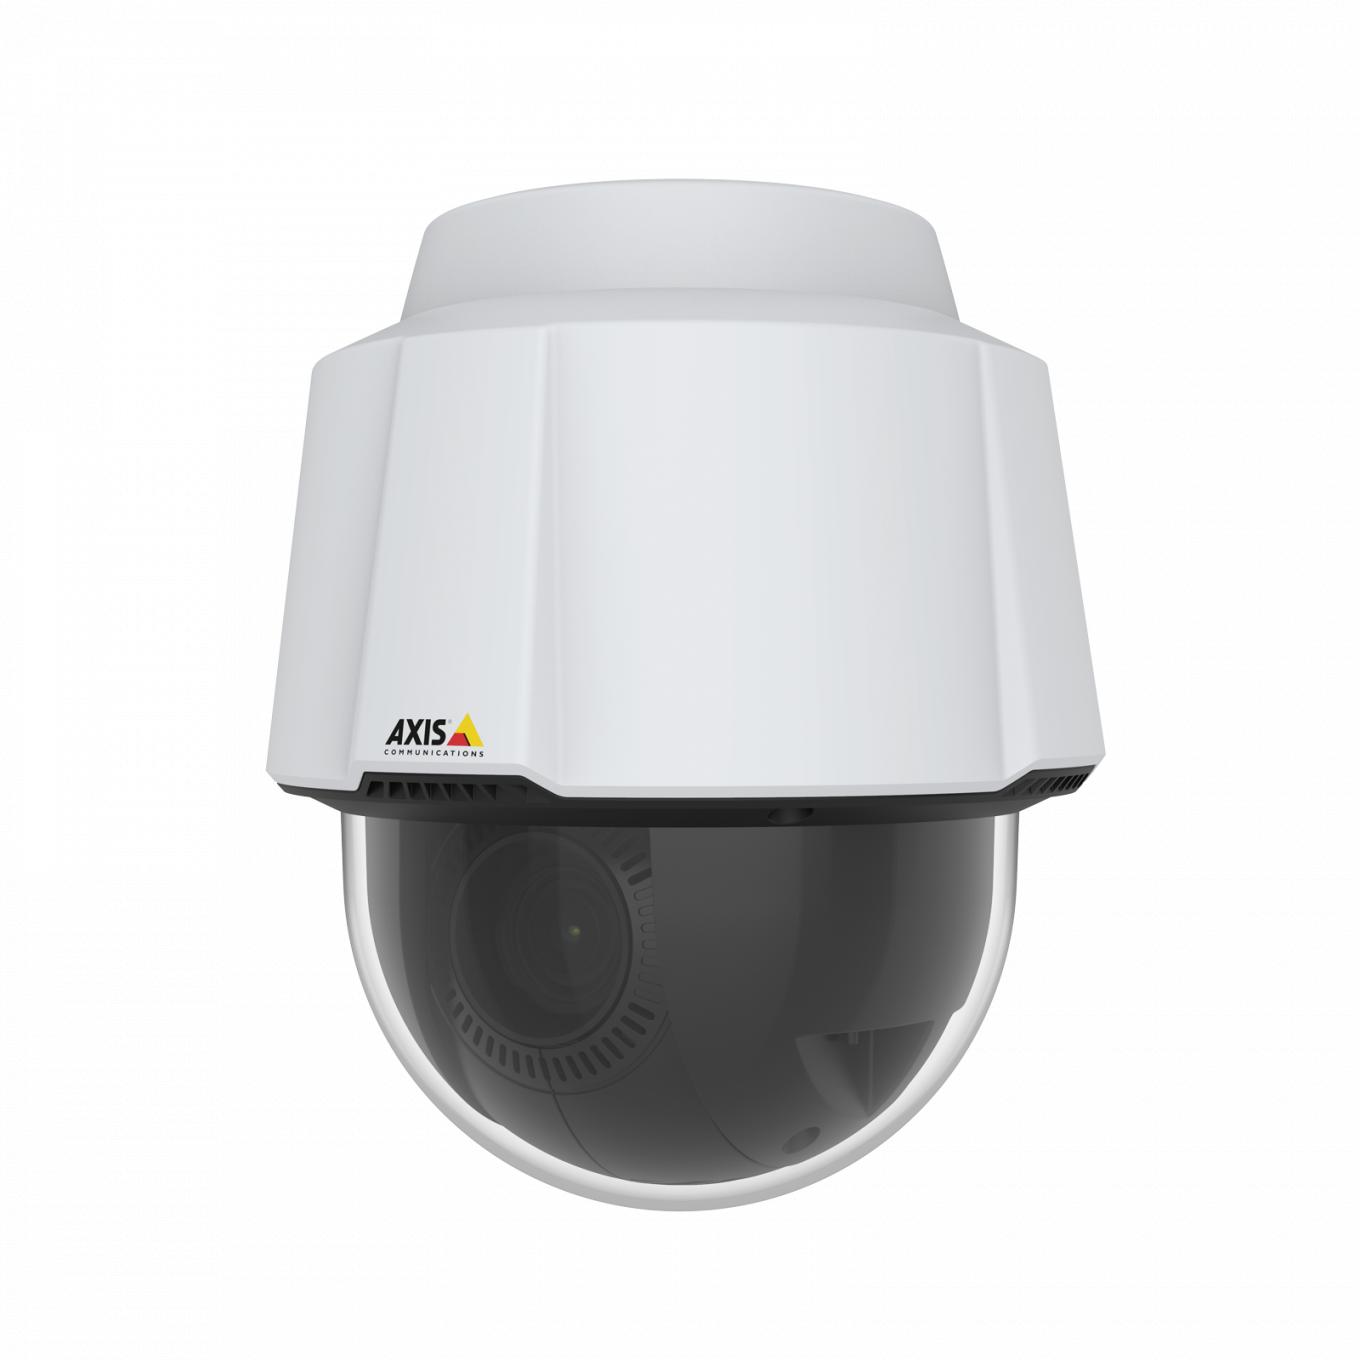 AXIS P5654-E PTZ IP camera from left